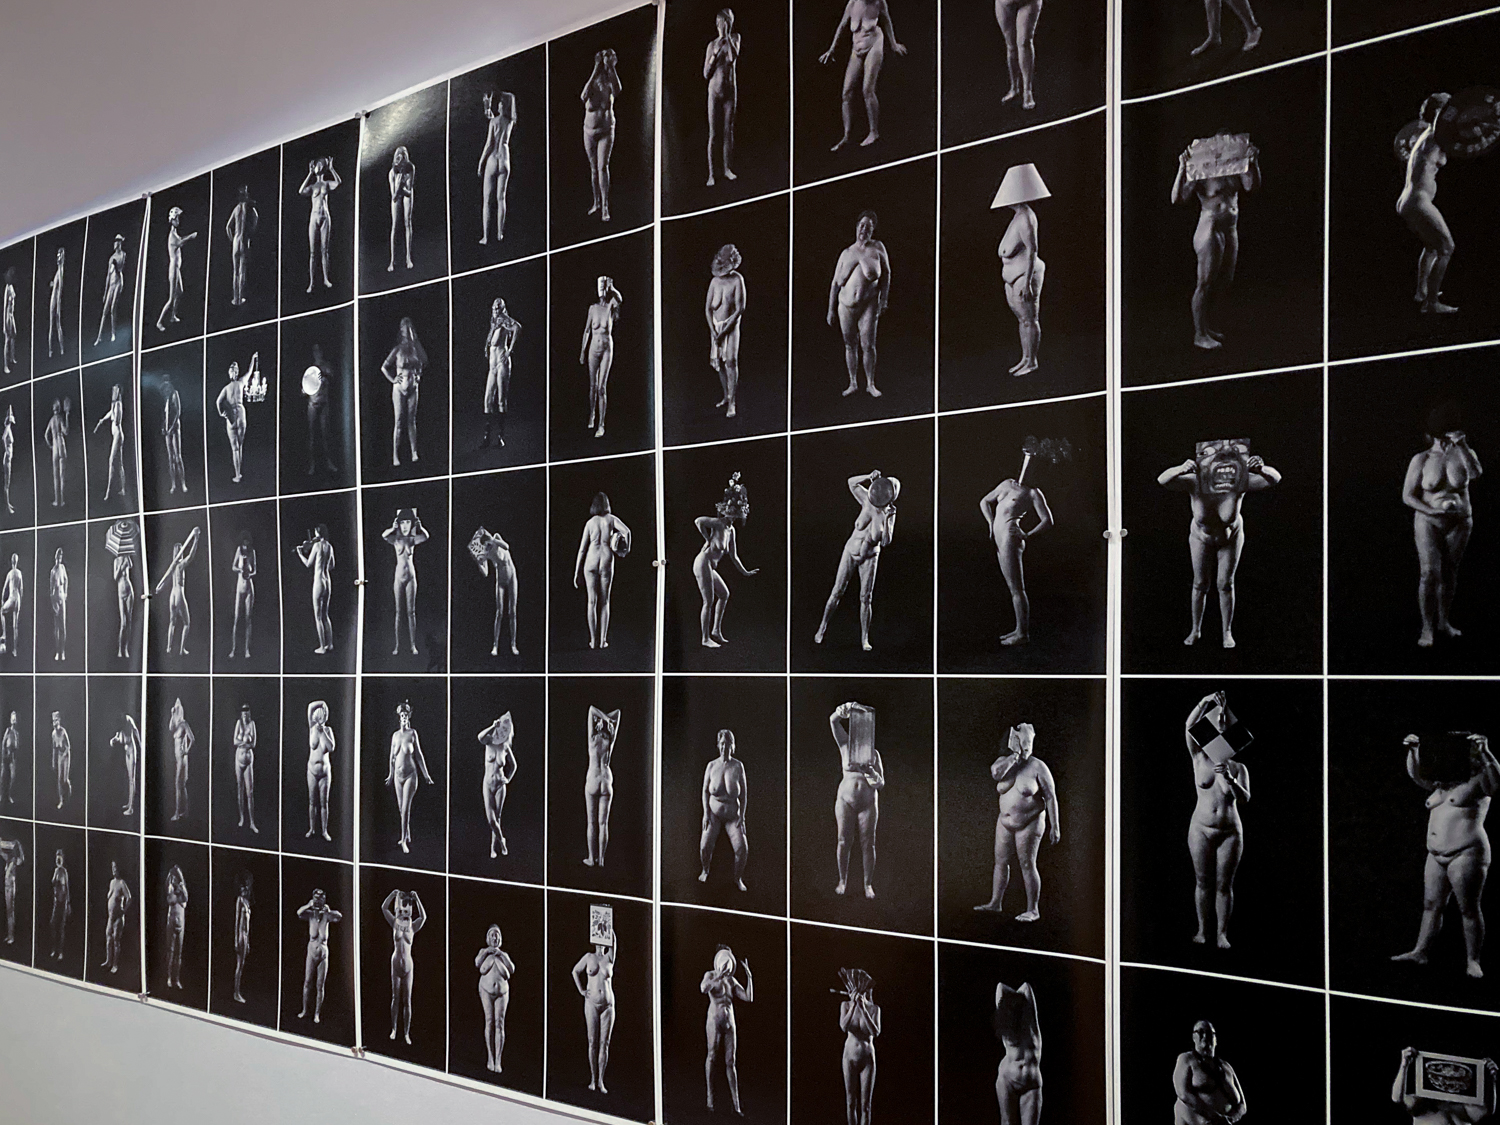 A series of black and white images of naked women on a gallery wall